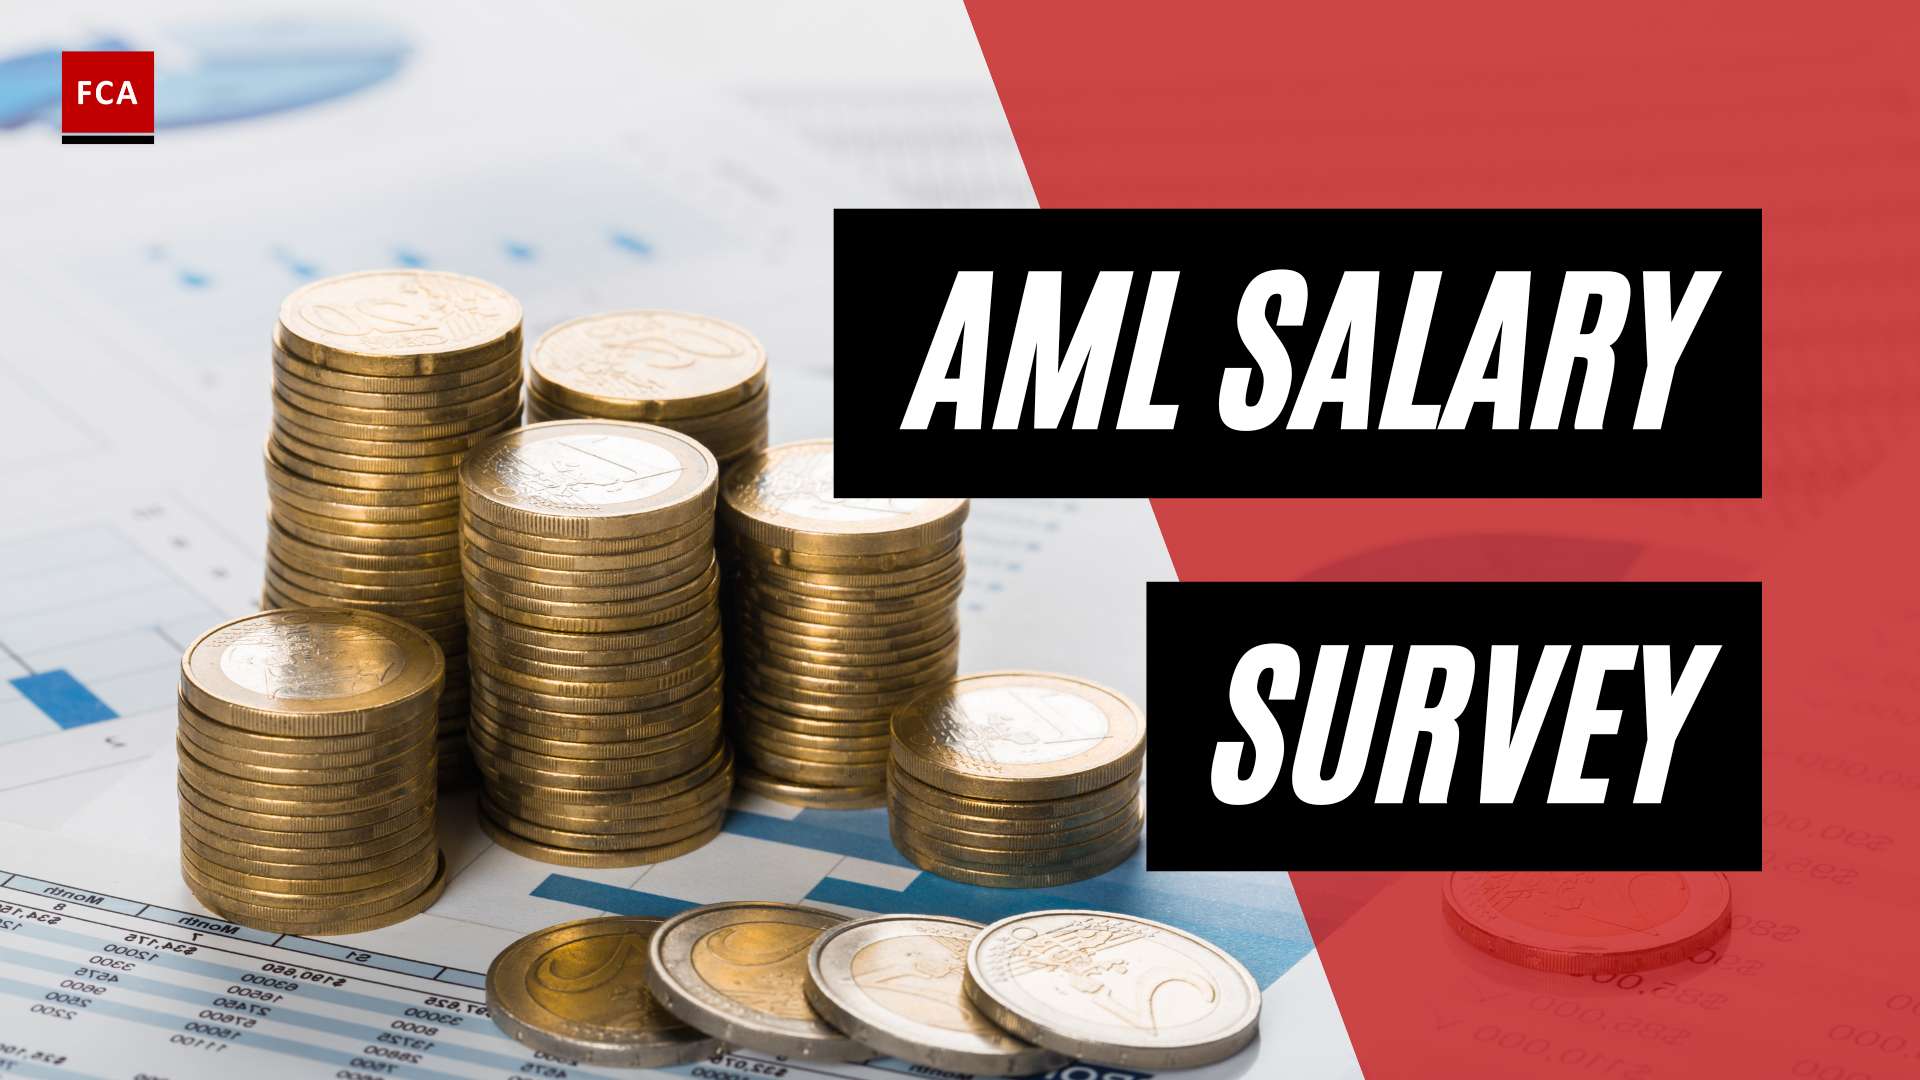 Power Up Your Aml Career: Insights From The Latest Salary Survey